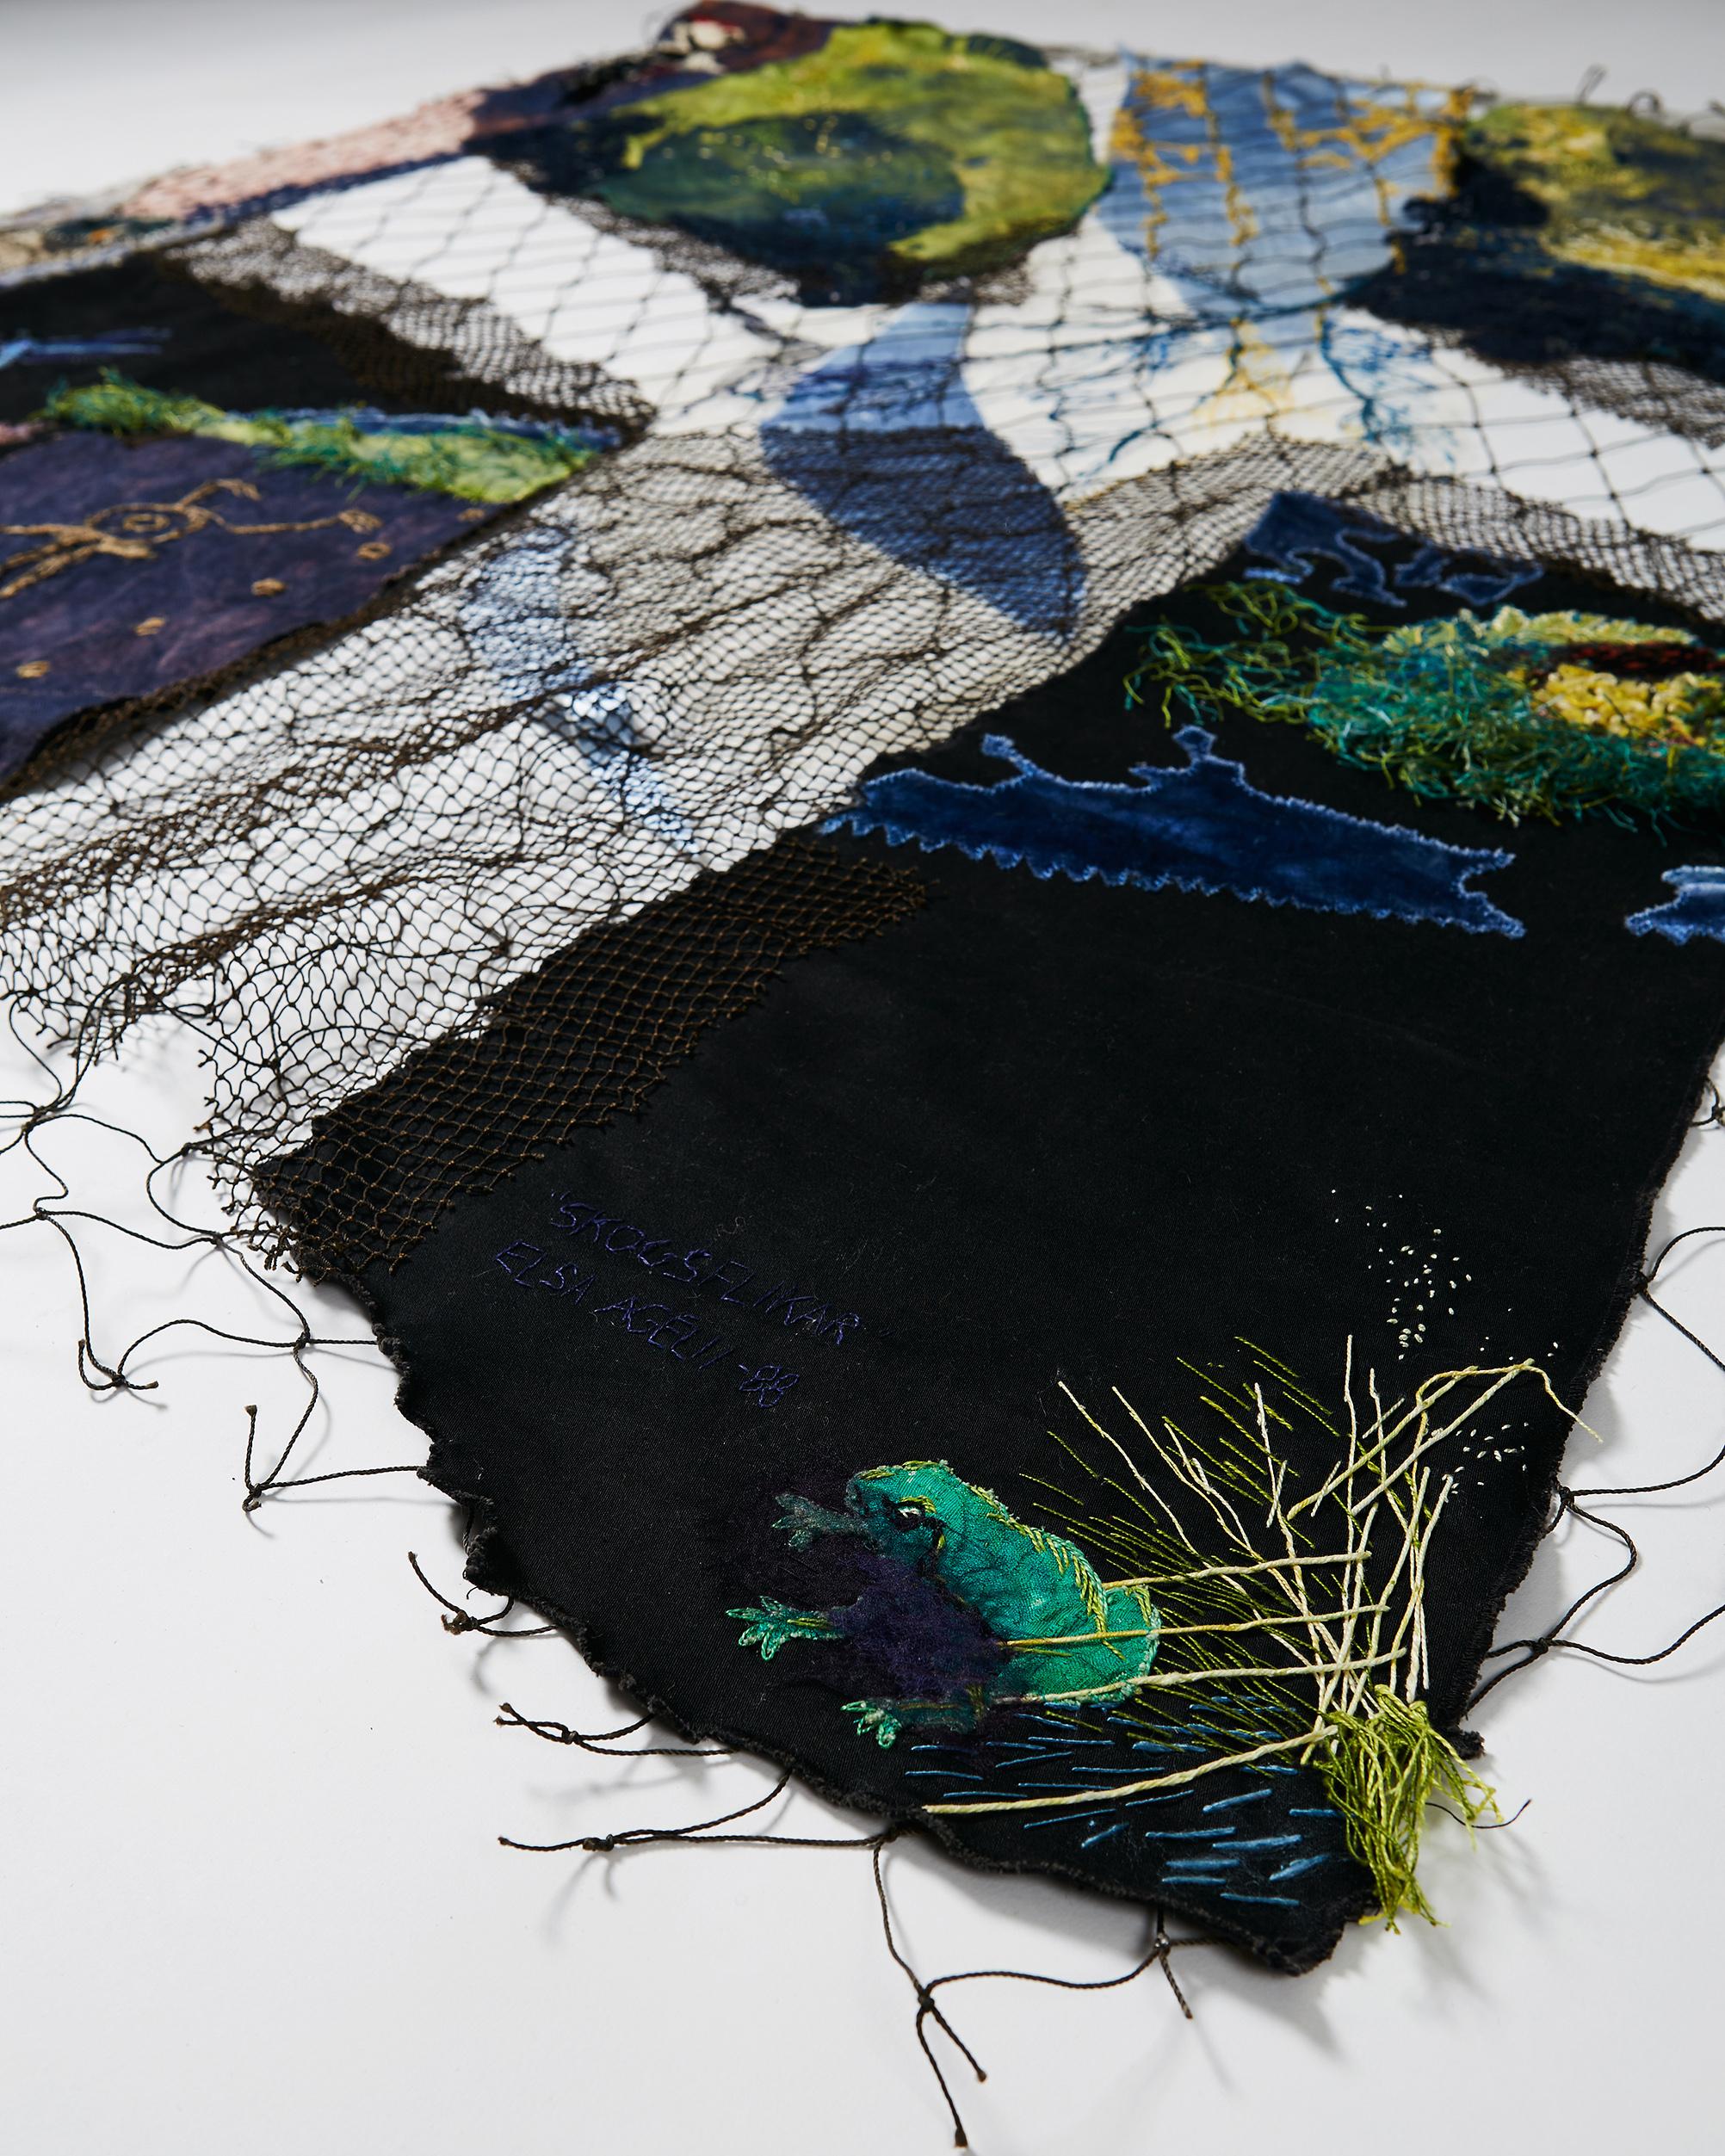 Scandinavian Modern Tapestry 'Forest Fragments' by Elsa Agélii, Silk and Mixed Media, 1988, Sweden For Sale